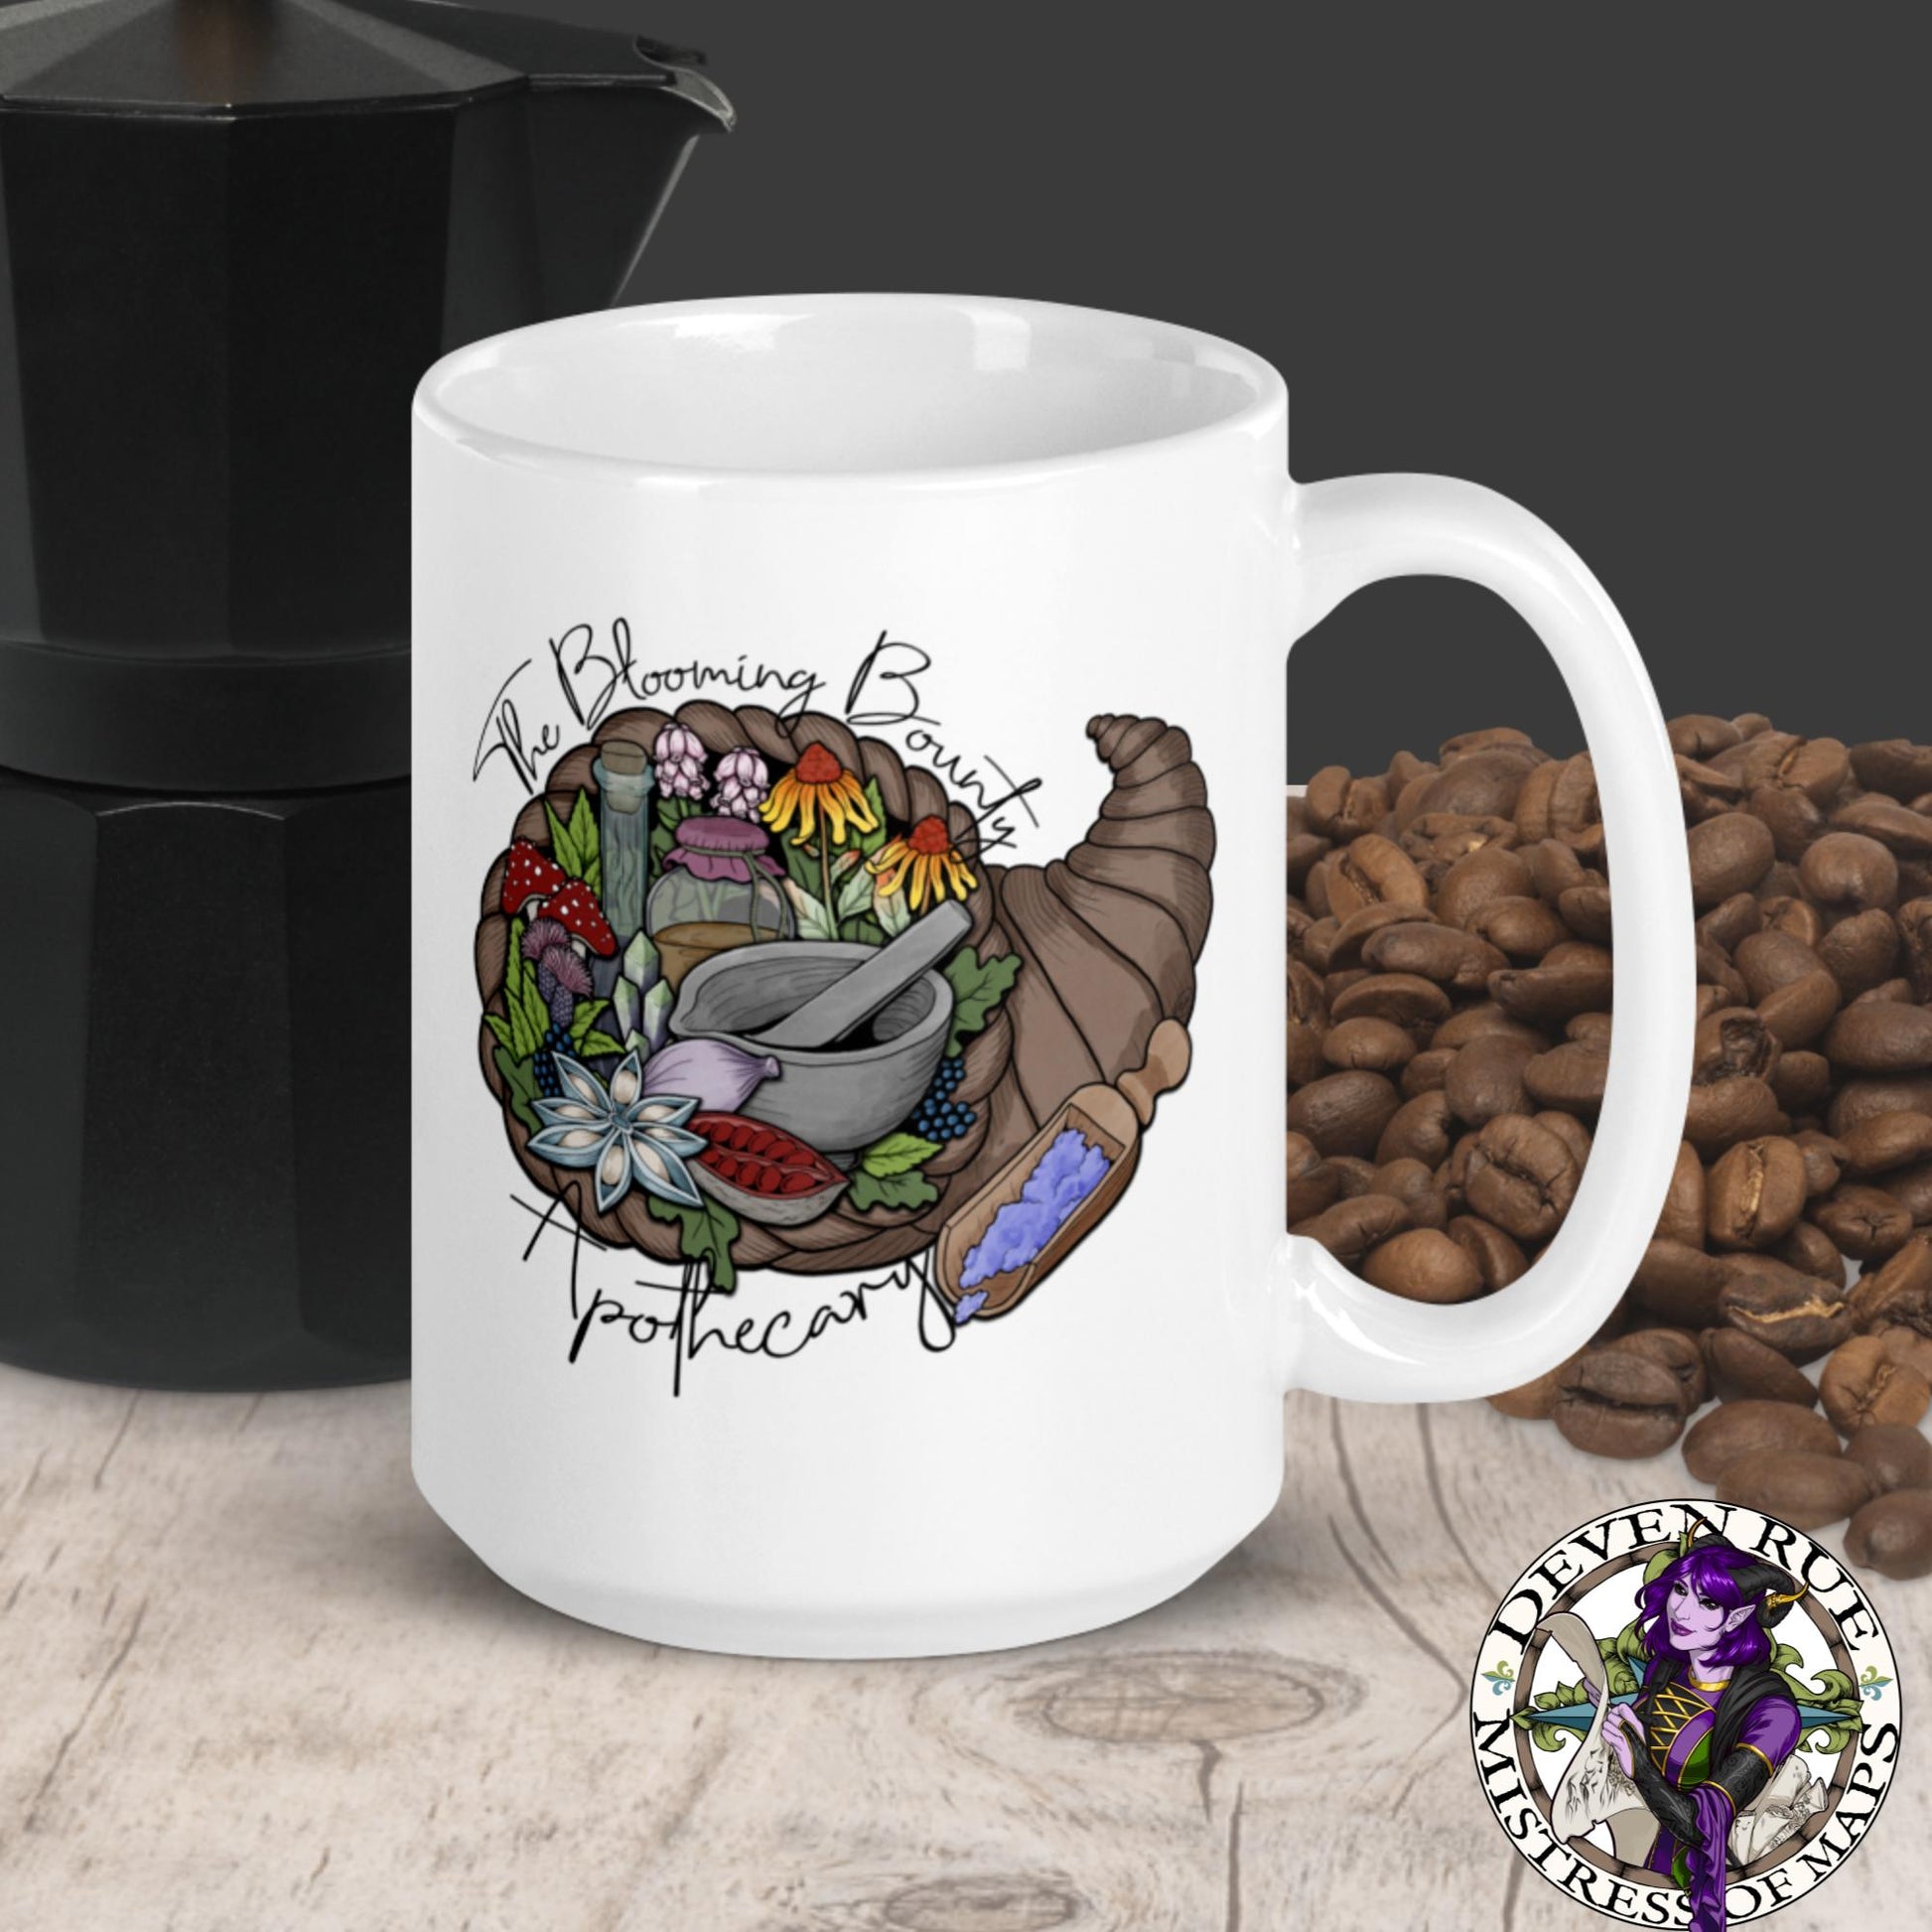 A white mug with The Blooming Bounty Apothecary logo featuring a cornucopia of herbalism supplies, sits with coffee beans and a kettle.